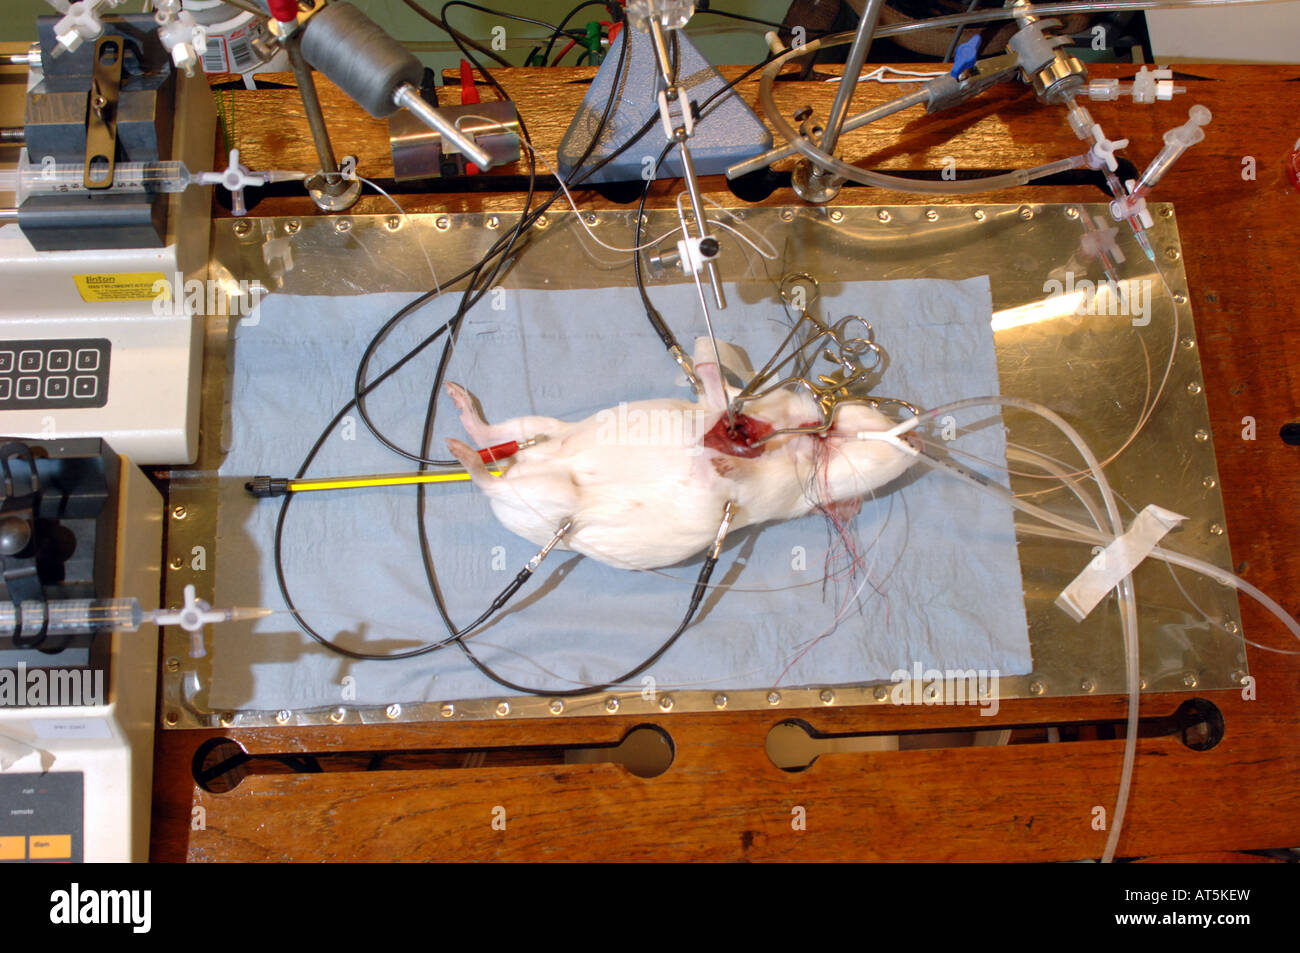 MEDICAL EXPERIMENT ON A RAT TO HELP TREAT HEART DISEASE Stock Photo